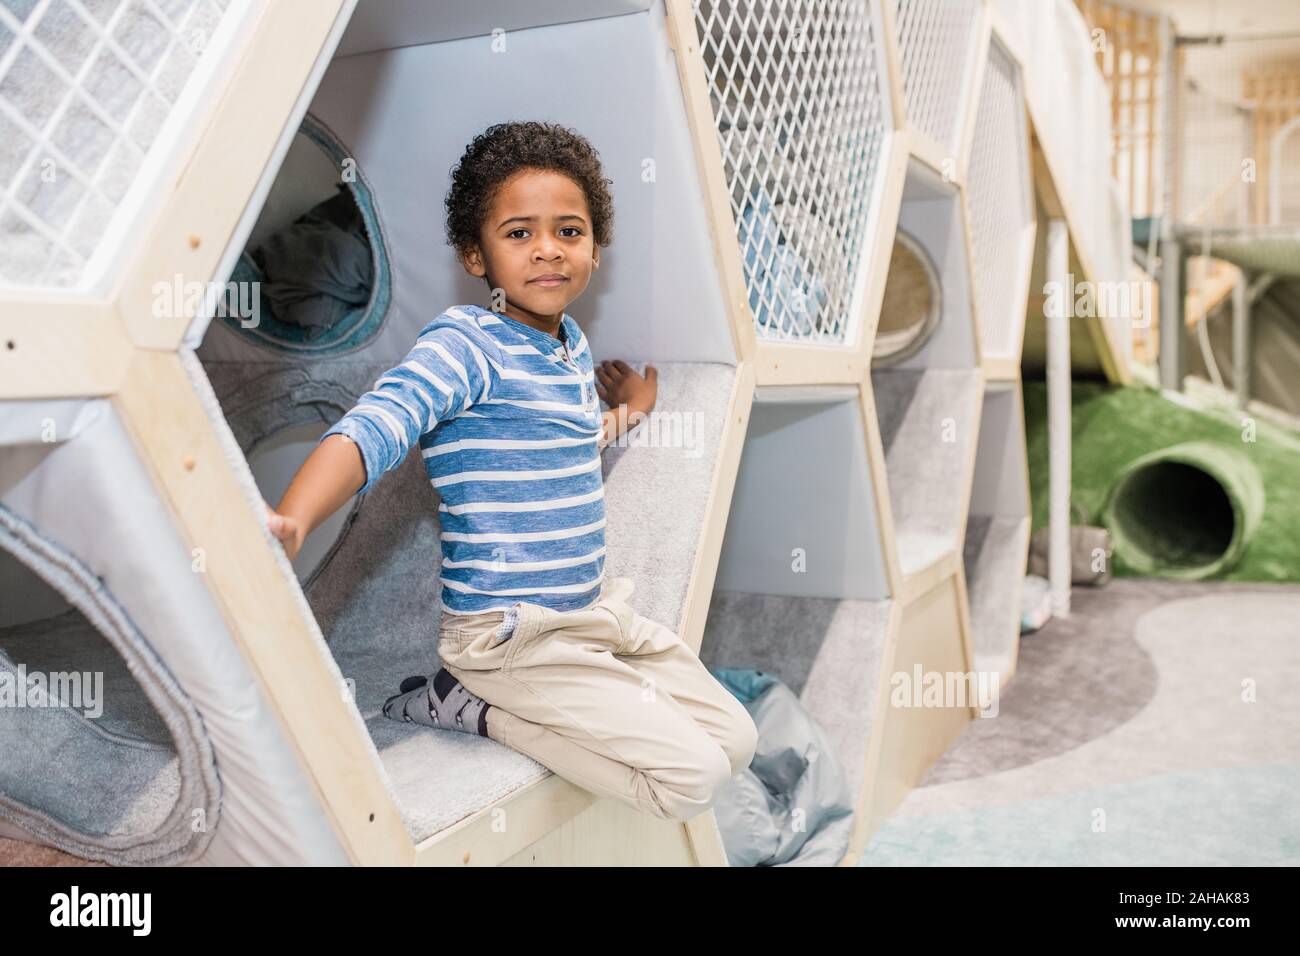 Adorable pre-elementary child of African ethnicity wearing shirt and jeans Stock Photo